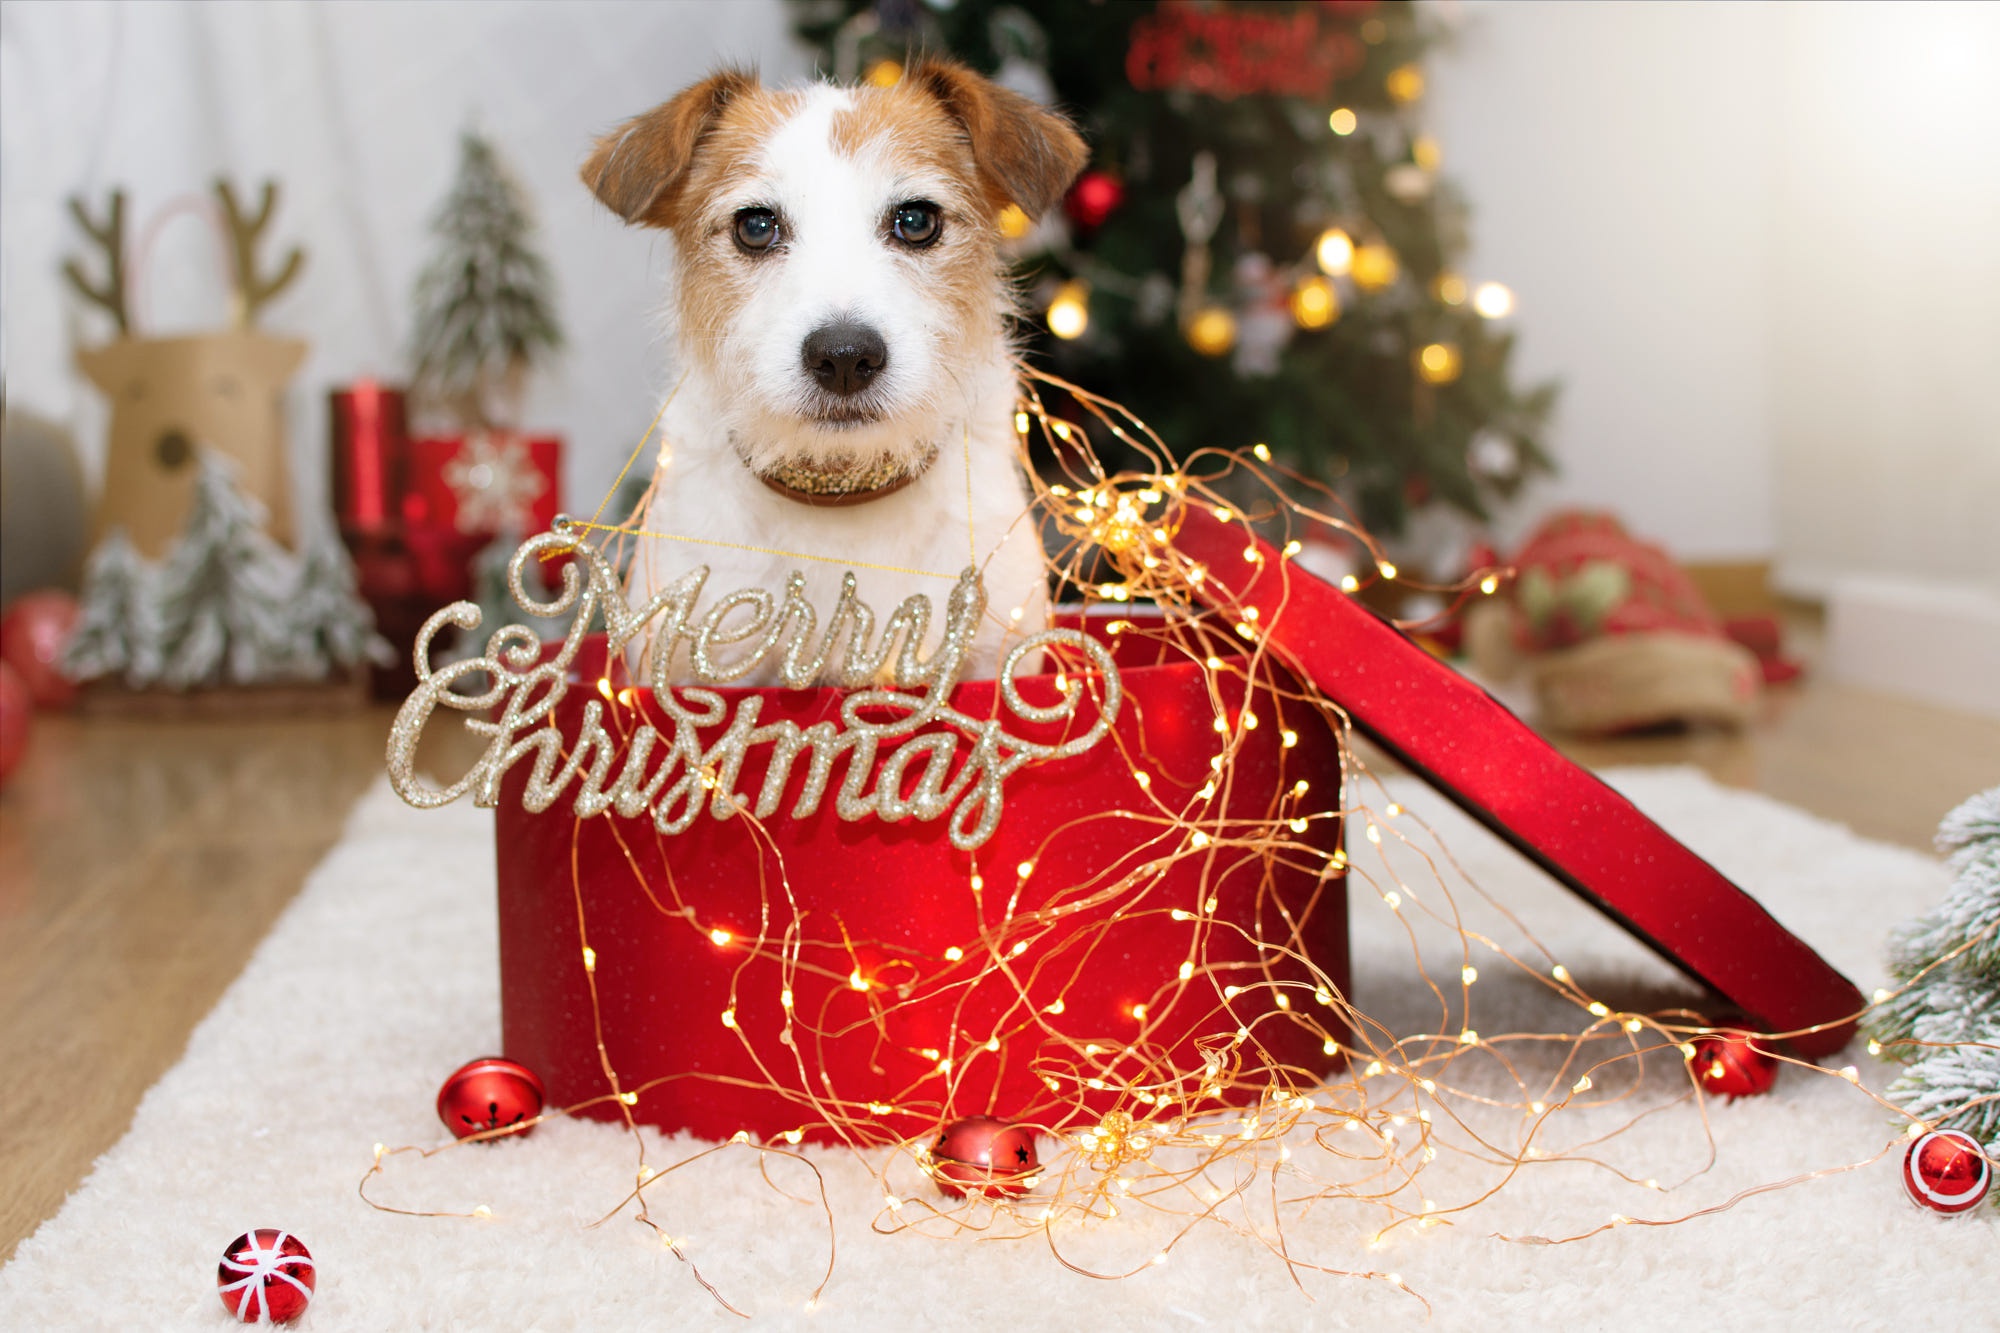 Baby Animal Christmas Lights Dog Merry Christmas Parson Russell Terrier Pet Puppy 2000x1333